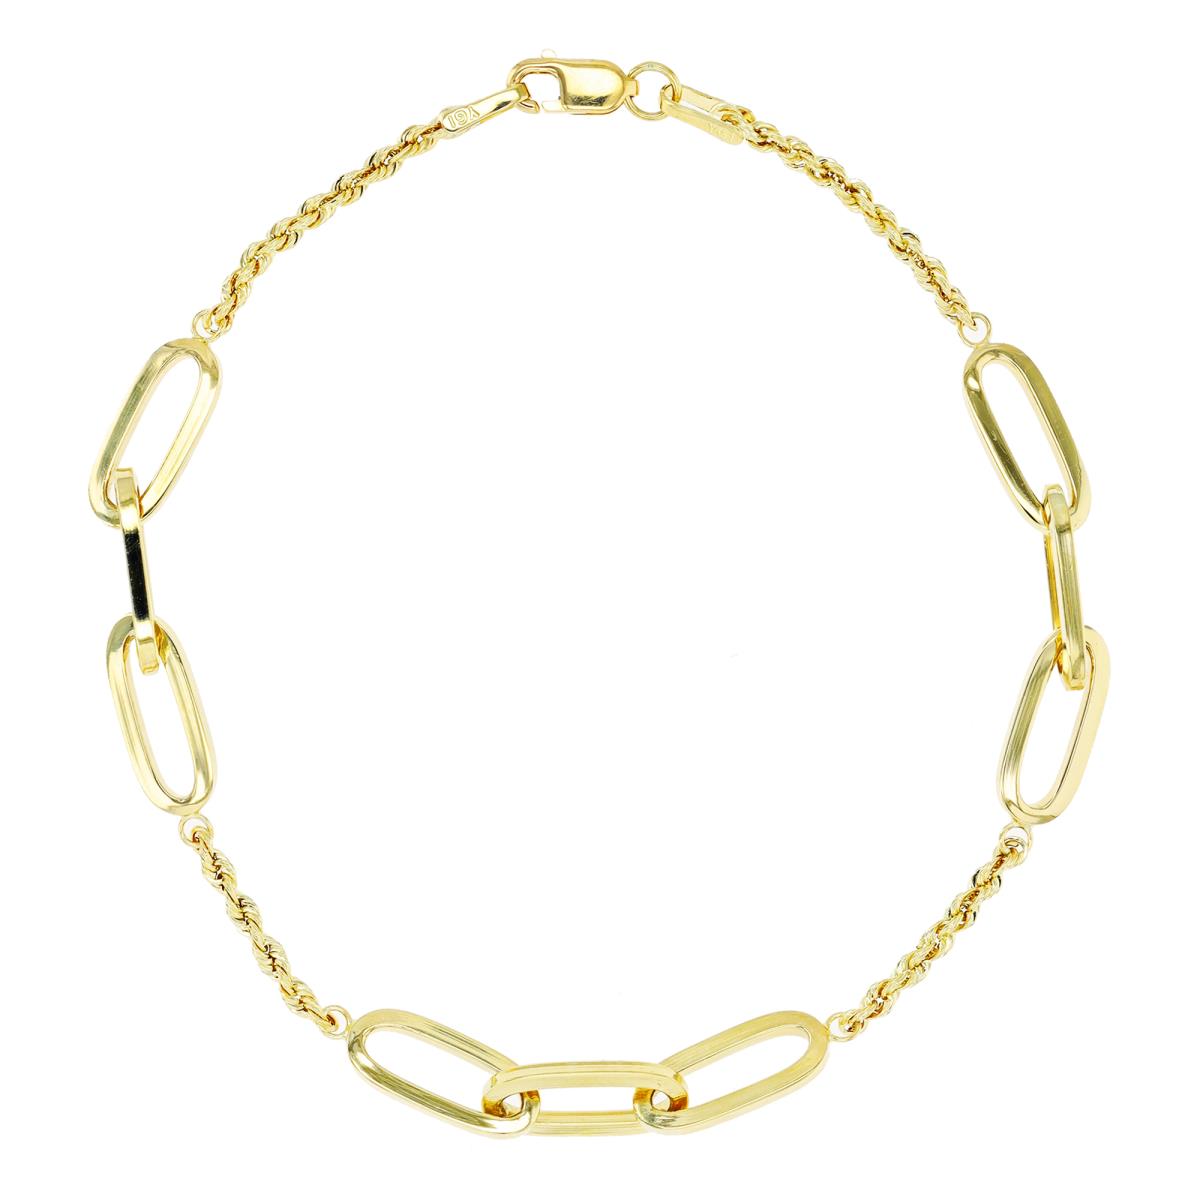 10K Yellow Gold 2.50mm-5.00mm Rope and Paper Clip 8" Chain Bracelet